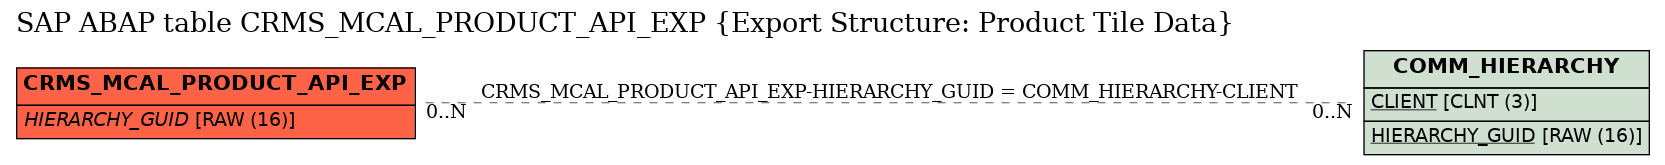 E-R Diagram for table CRMS_MCAL_PRODUCT_API_EXP (Export Structure: Product Tile Data)